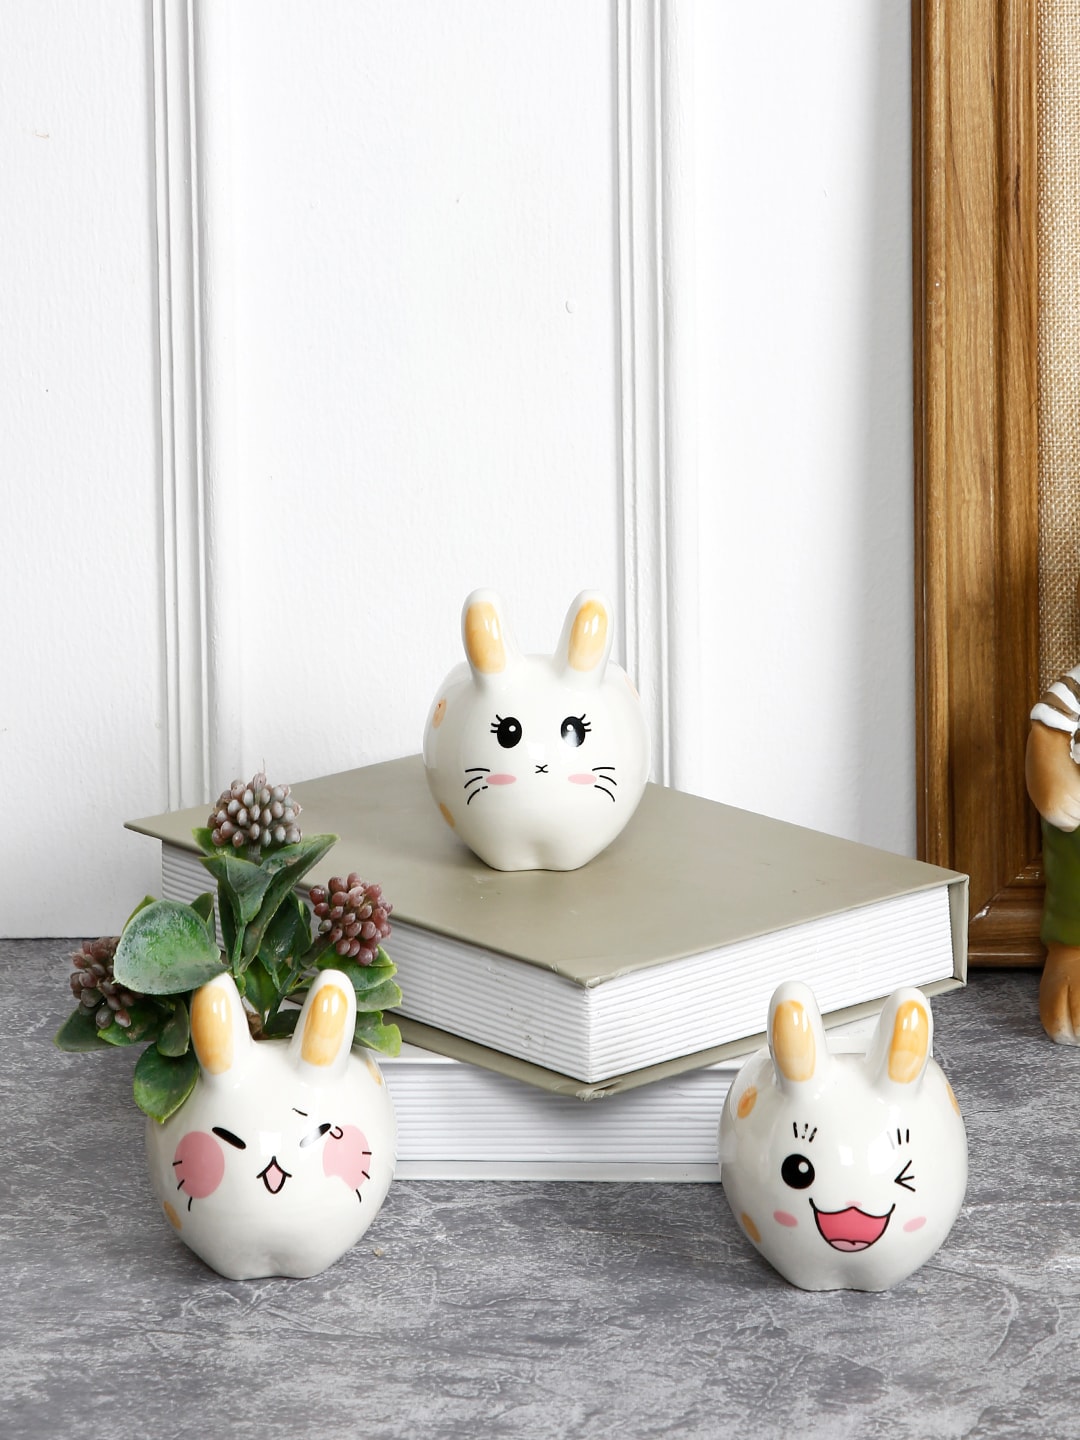 Aapno Rajasthan Set Of 3 Rabbit-Face Hand-Crafted Ceramic Planter Pots Price in India